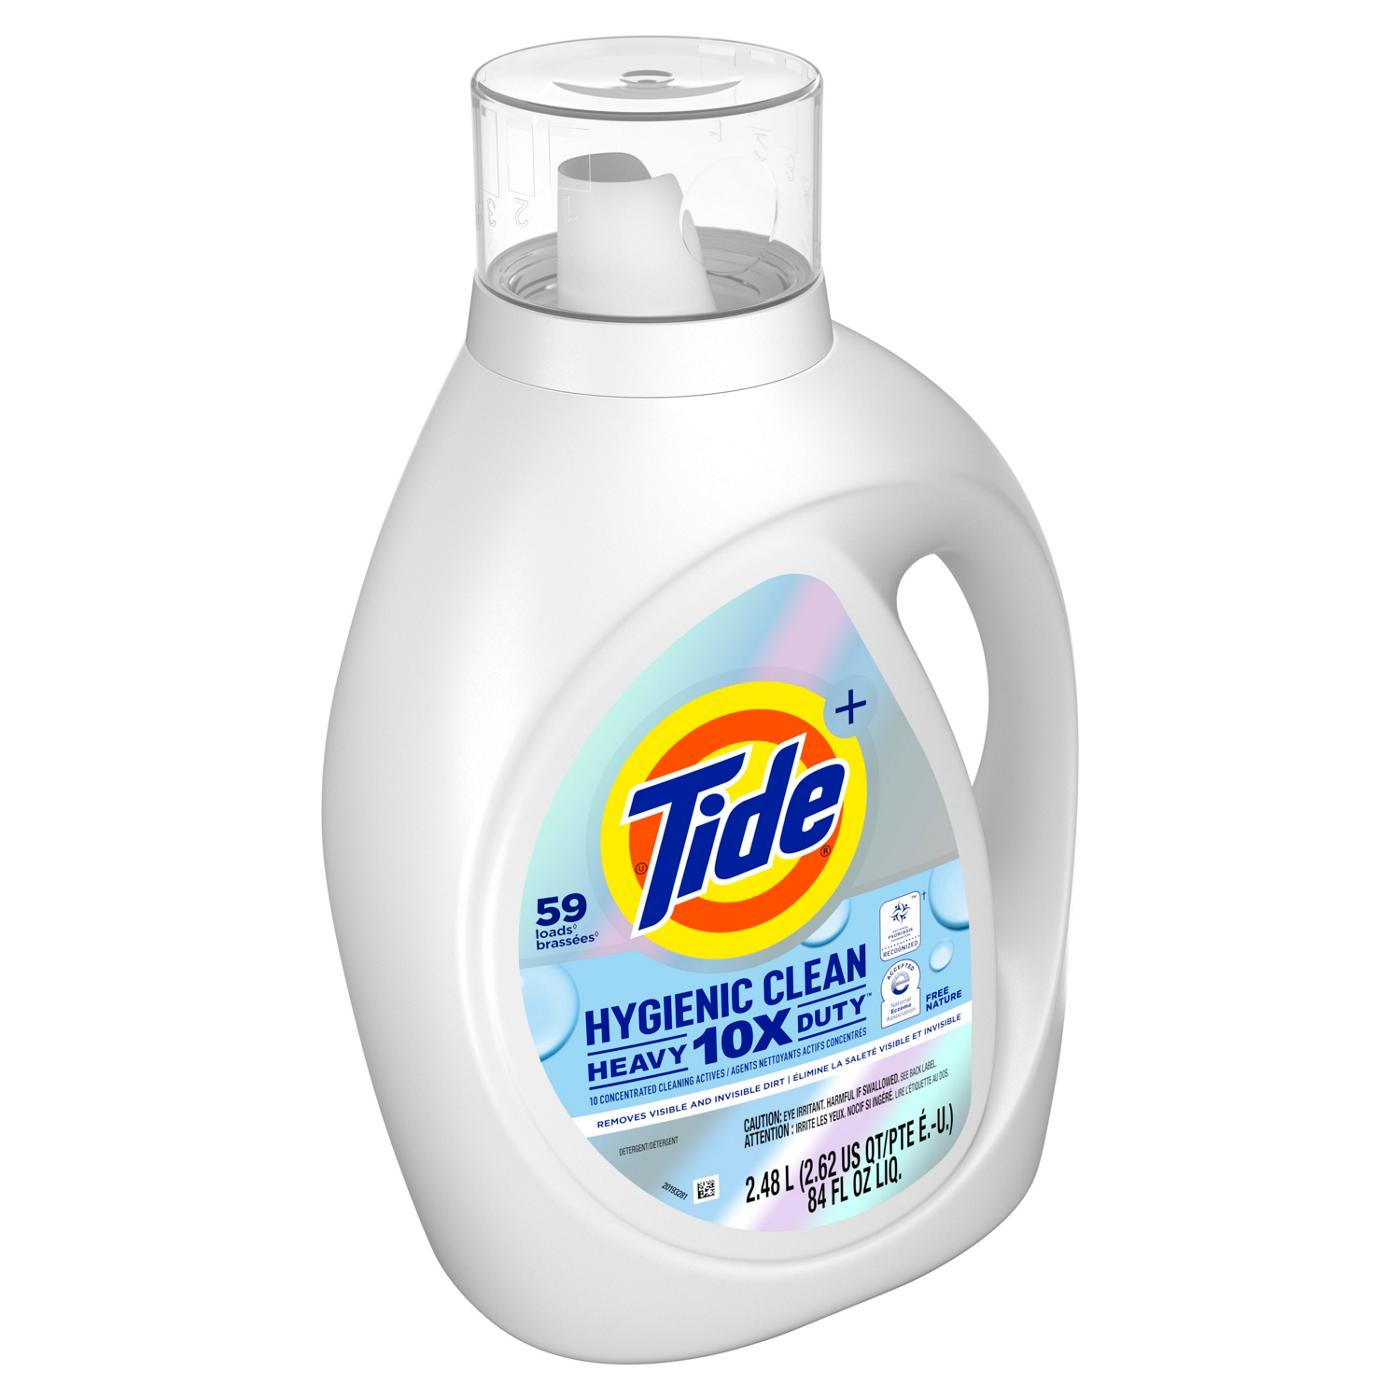 Tide + Hygienic Clean Heavy Duty HE Liquid Laundry Detergent, 59 Loads - Free Nature; image 5 of 6